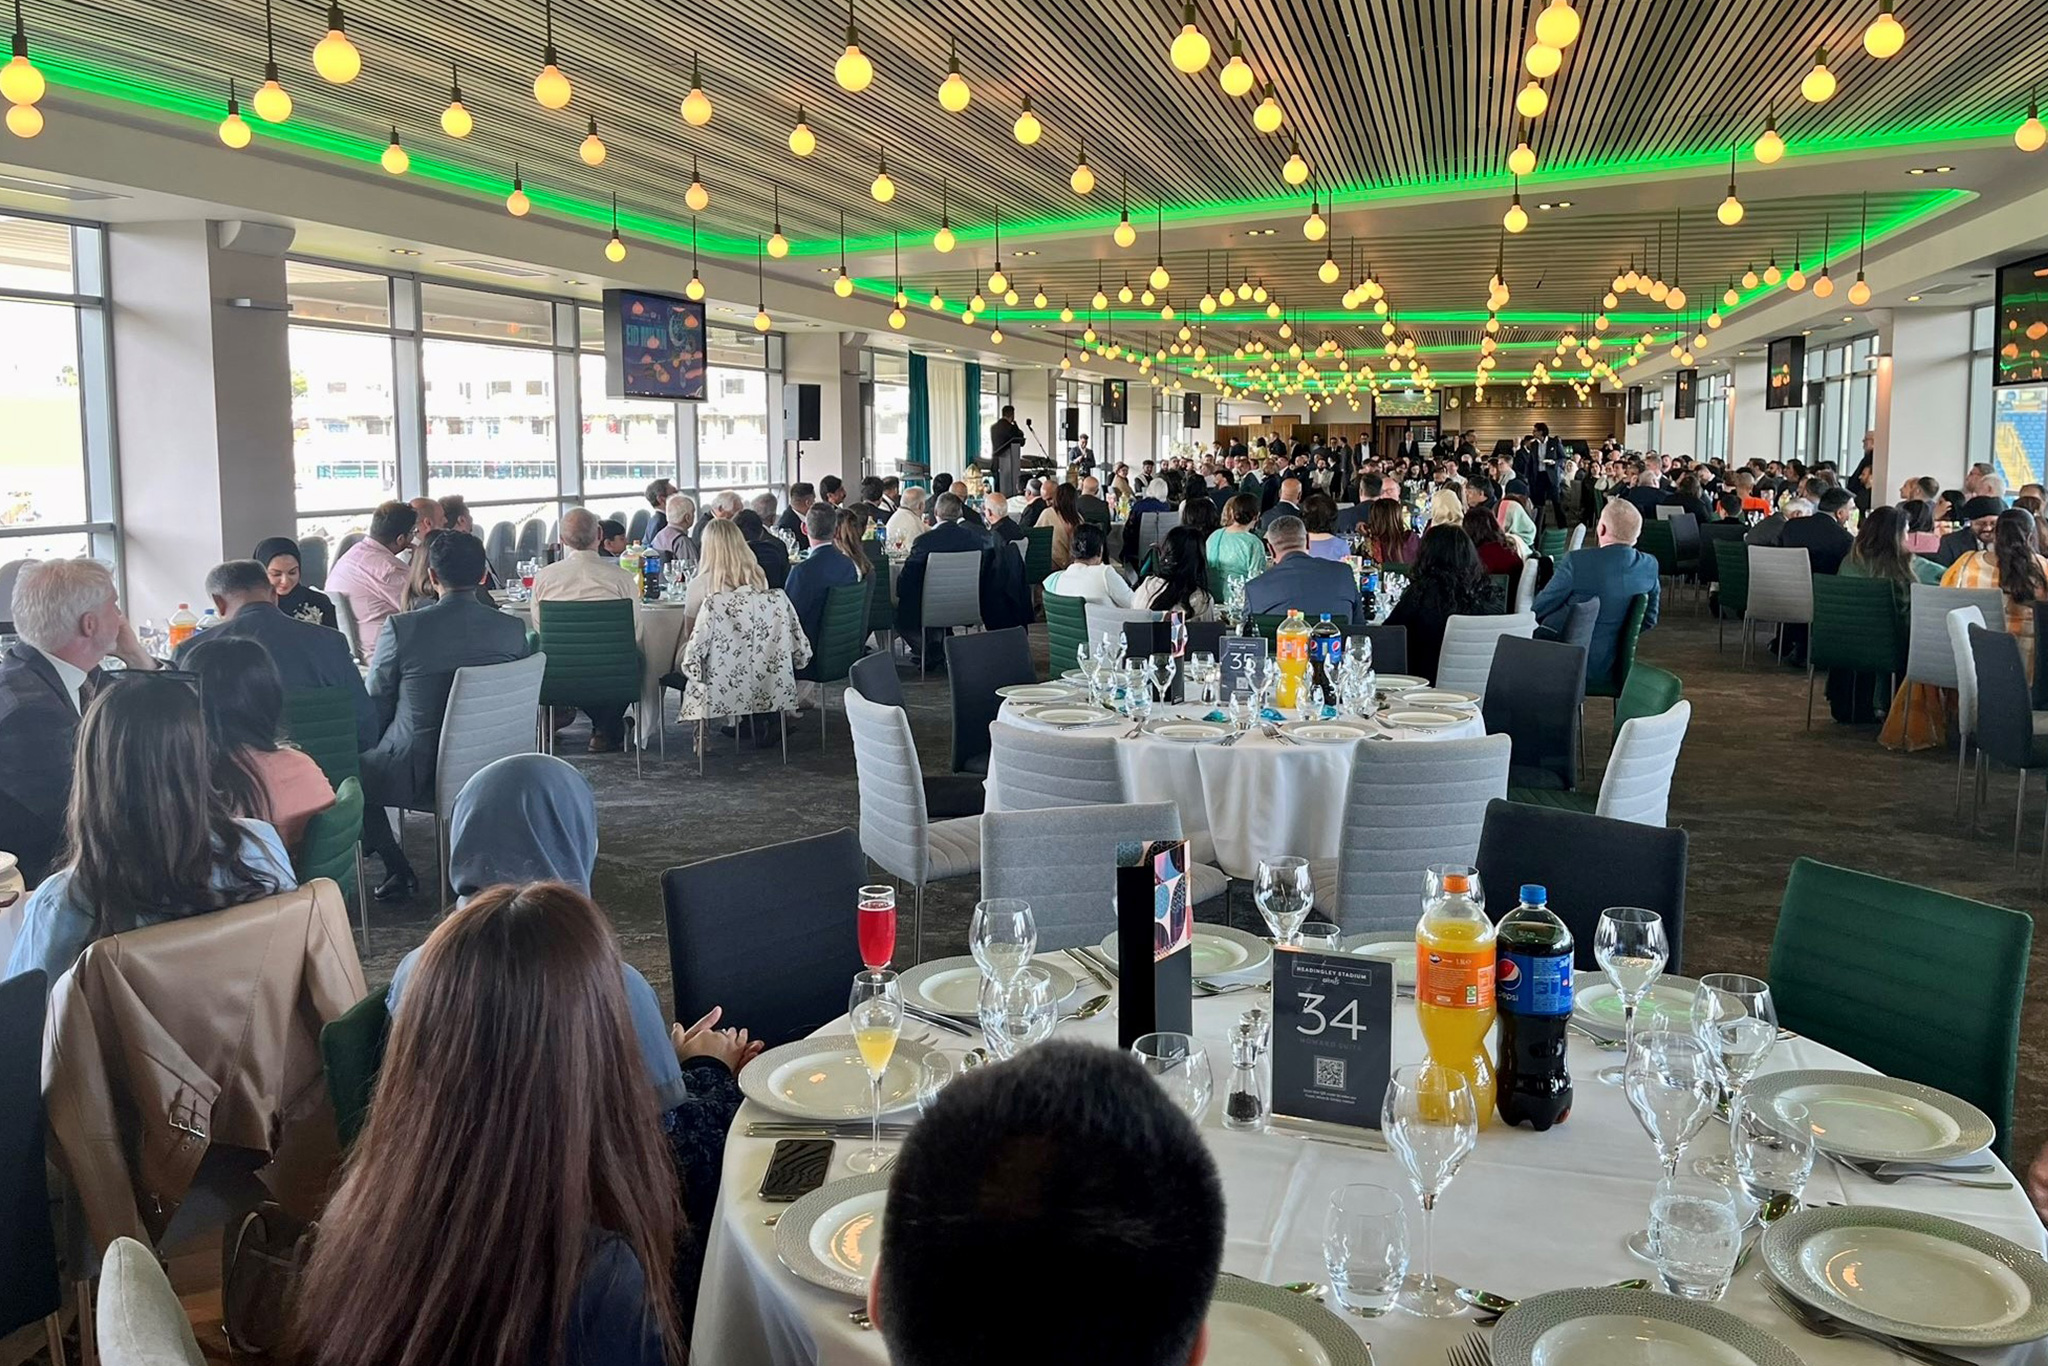 Regal Food Products Group Plc are delighted to have sponsored the Yorkshire County Cricket Clubs (YCCC) annual Eid Milan celebration at Headingley Stadium yesterday evening (Tuesday 16th May).